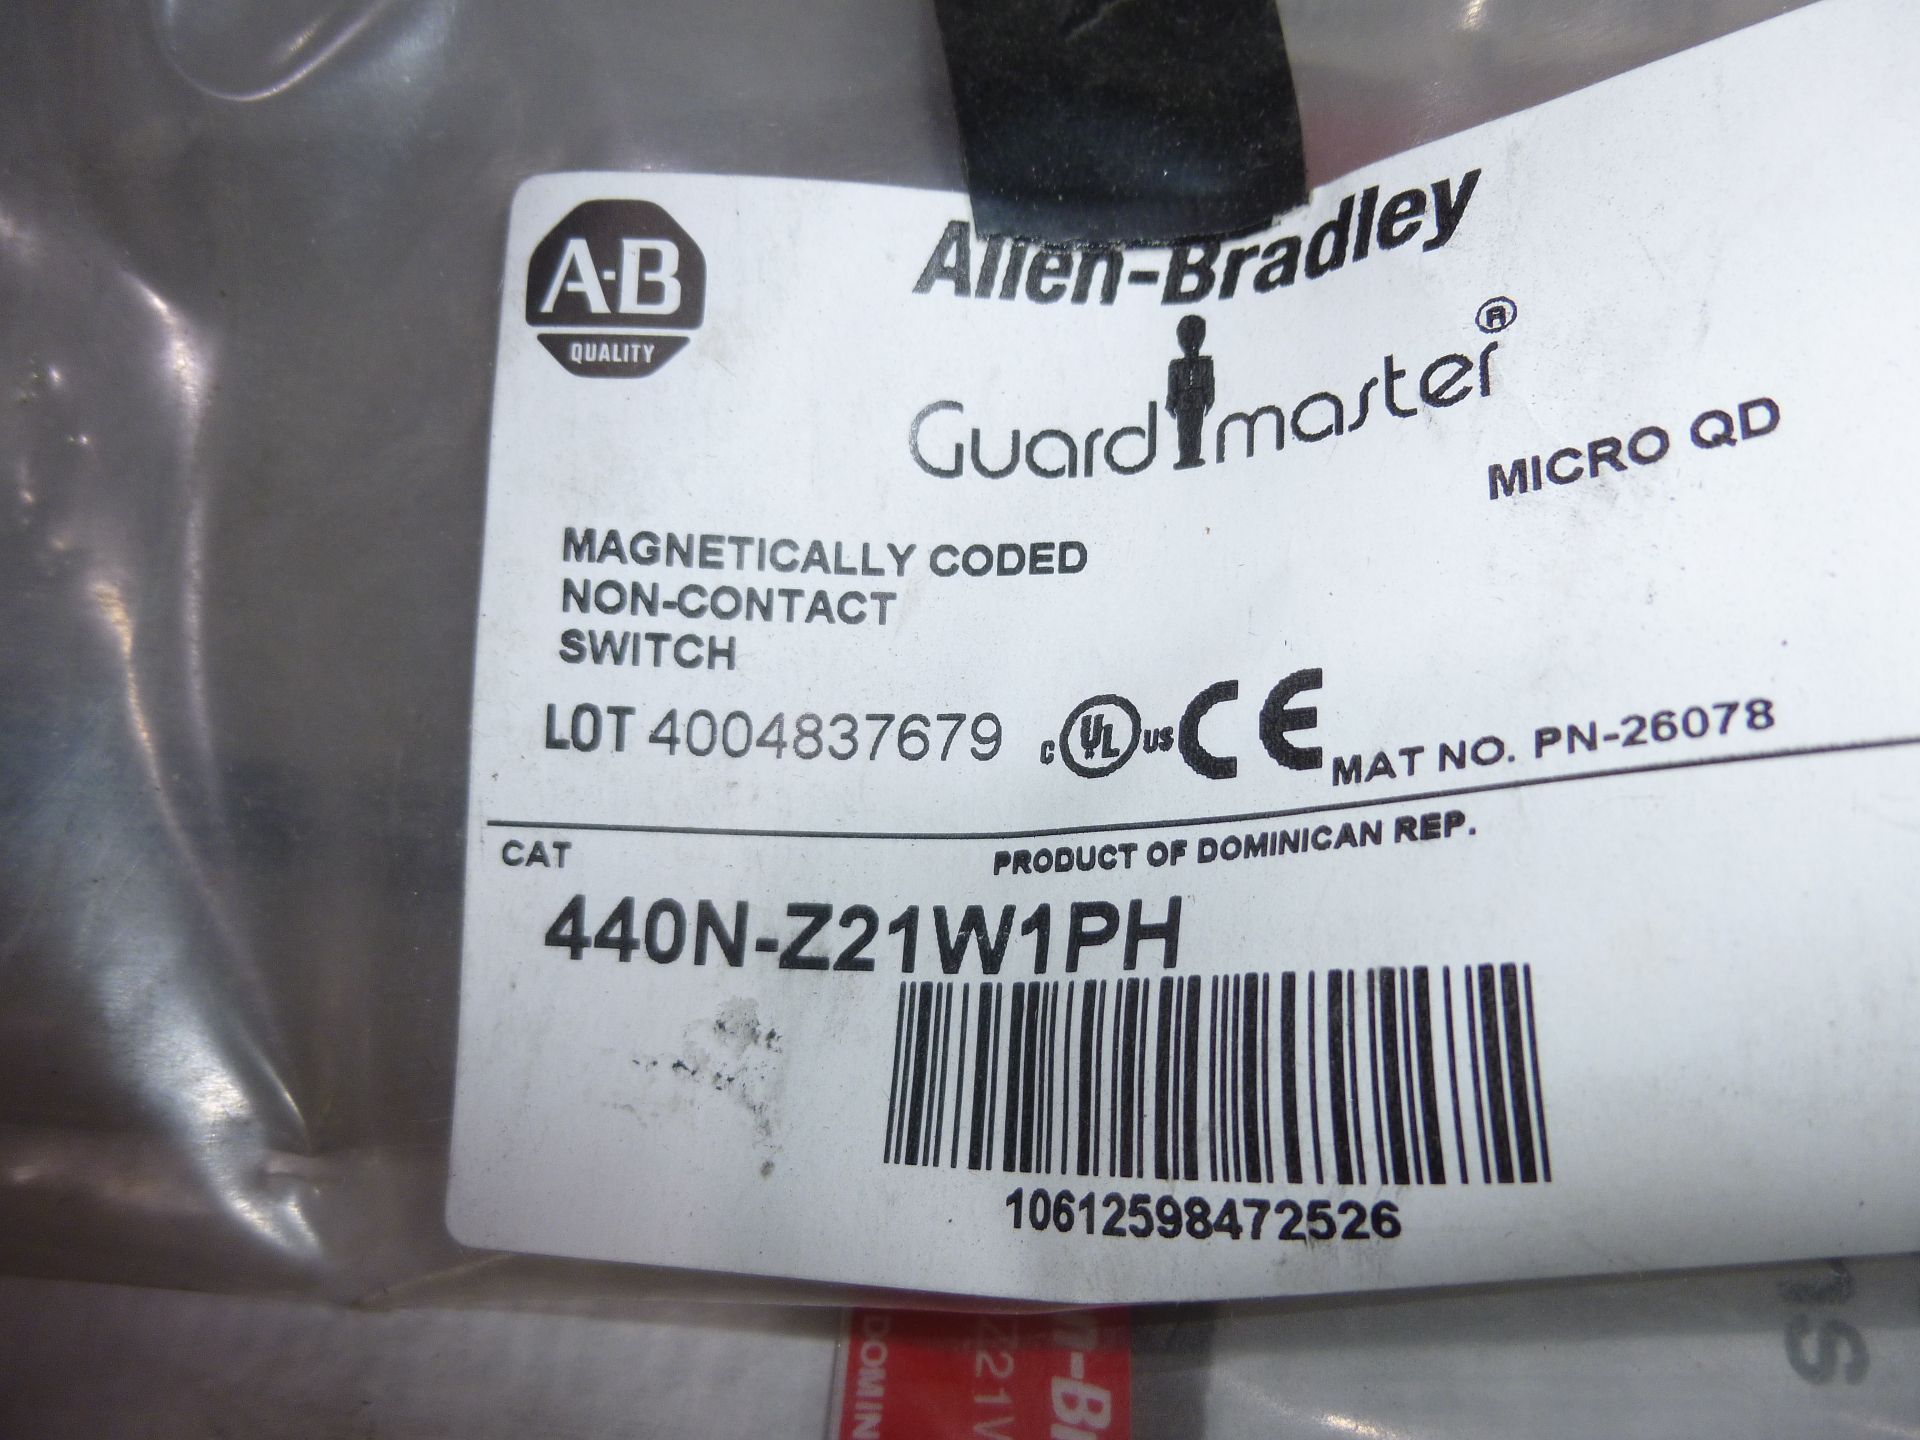 Qty 2 Allen Bradley Guard Master 440N-Z21W1PH, new in packages, as always with Brolyn LLC - Image 2 of 2